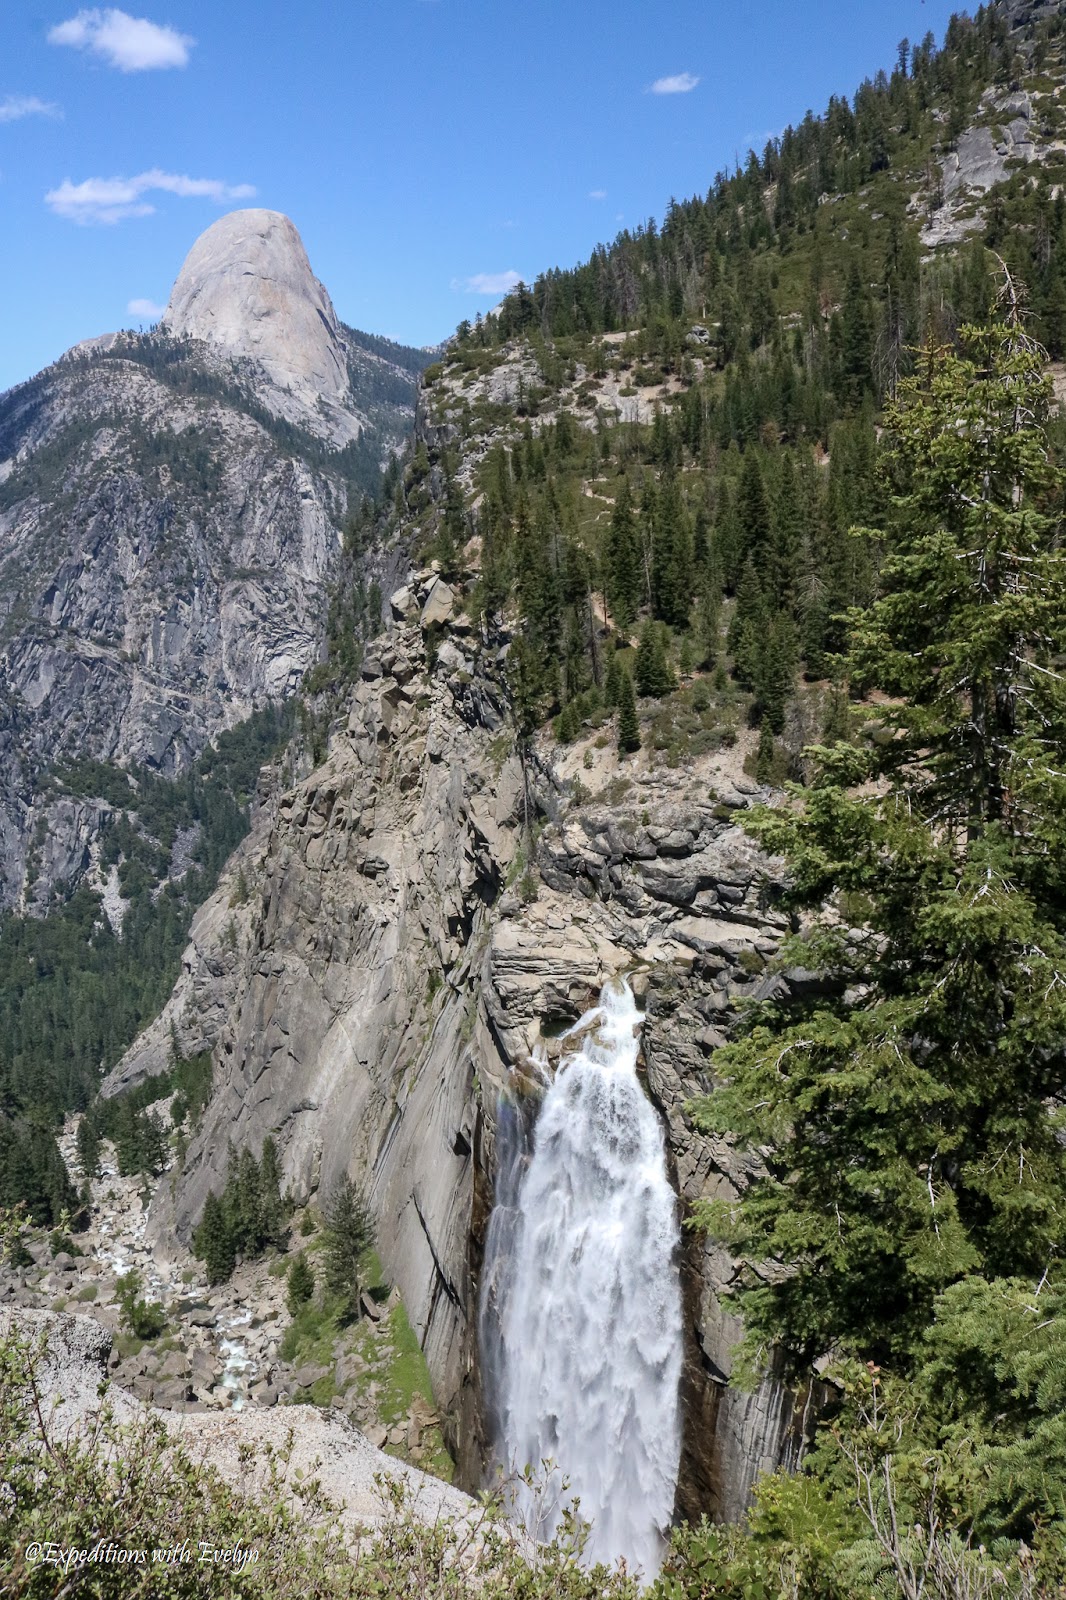 Illilouette Fall cascades down a cliff with the back of Half Dome in the background